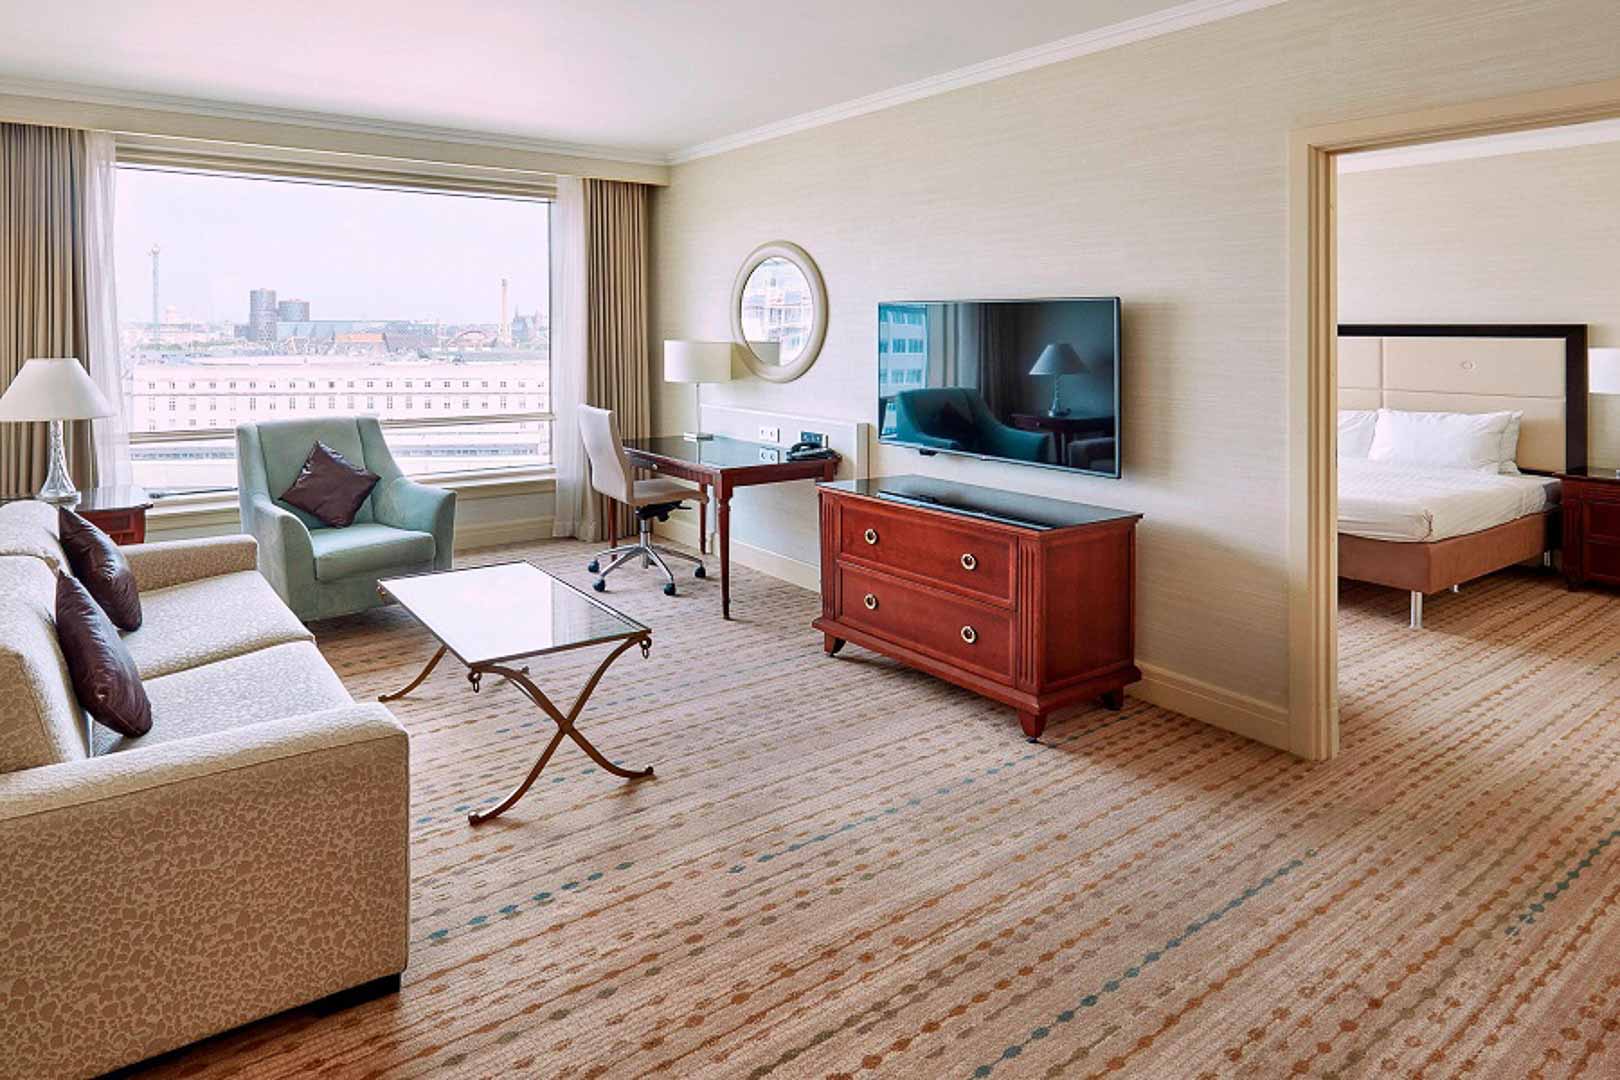 Suite including a living room, Marriott Hotel fitout and furniture, Brussels, Belgium